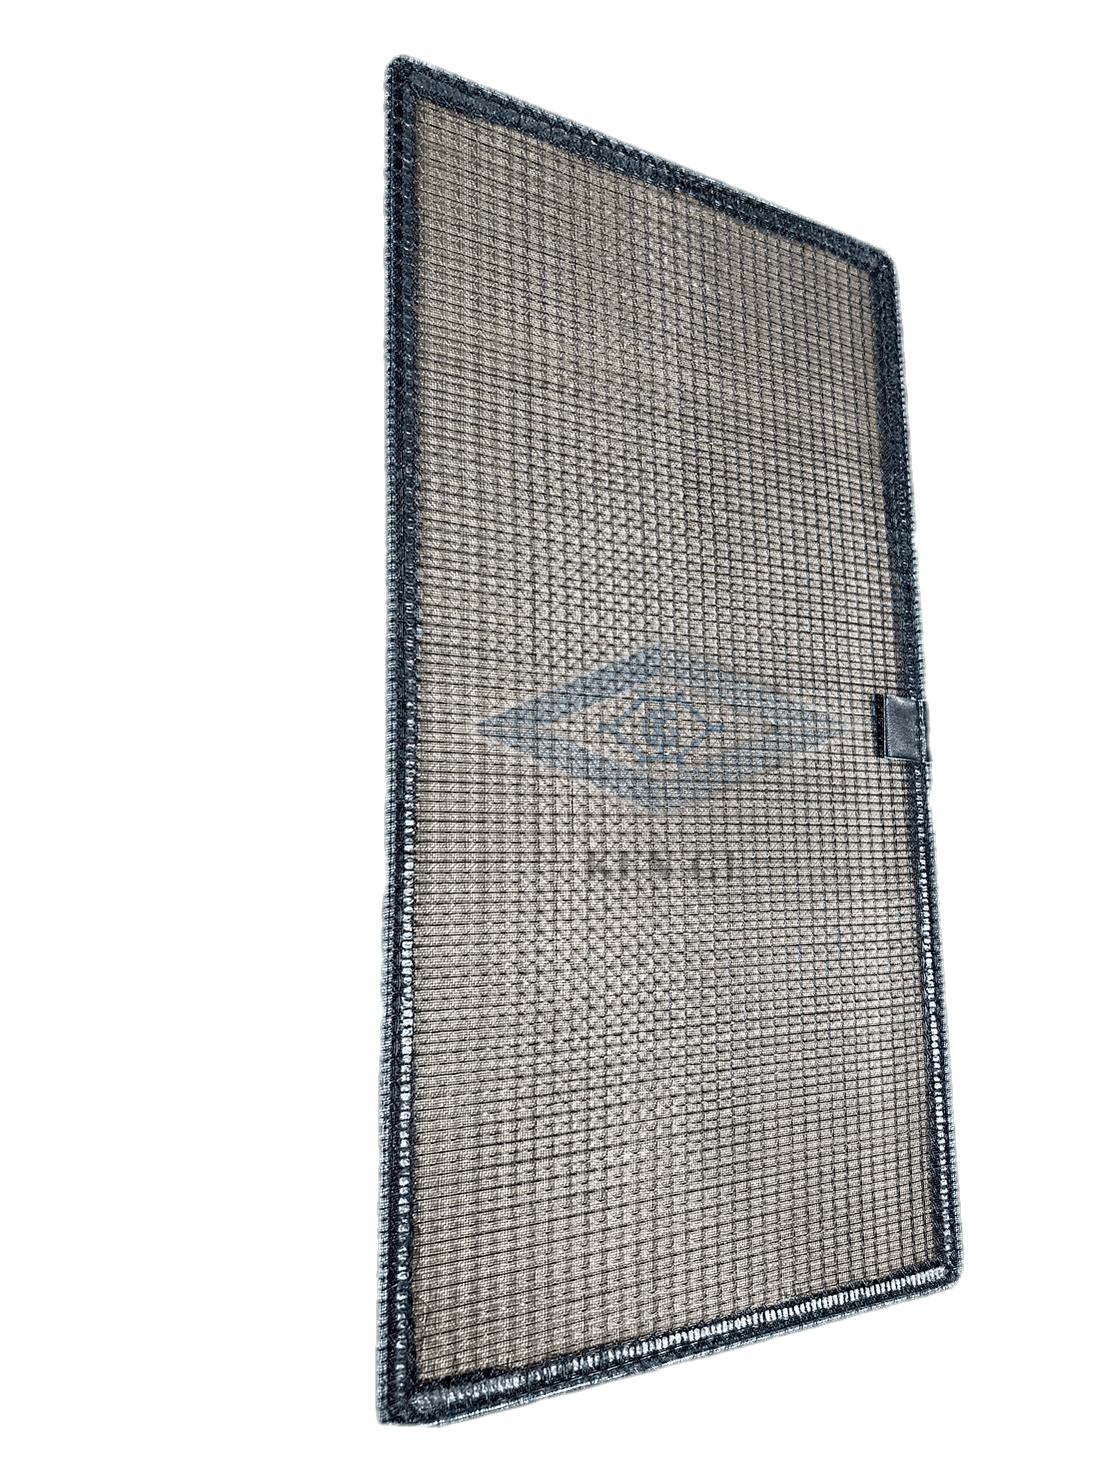 The wire frame material of non-encapsulated PE and PP filter screens is galvanized